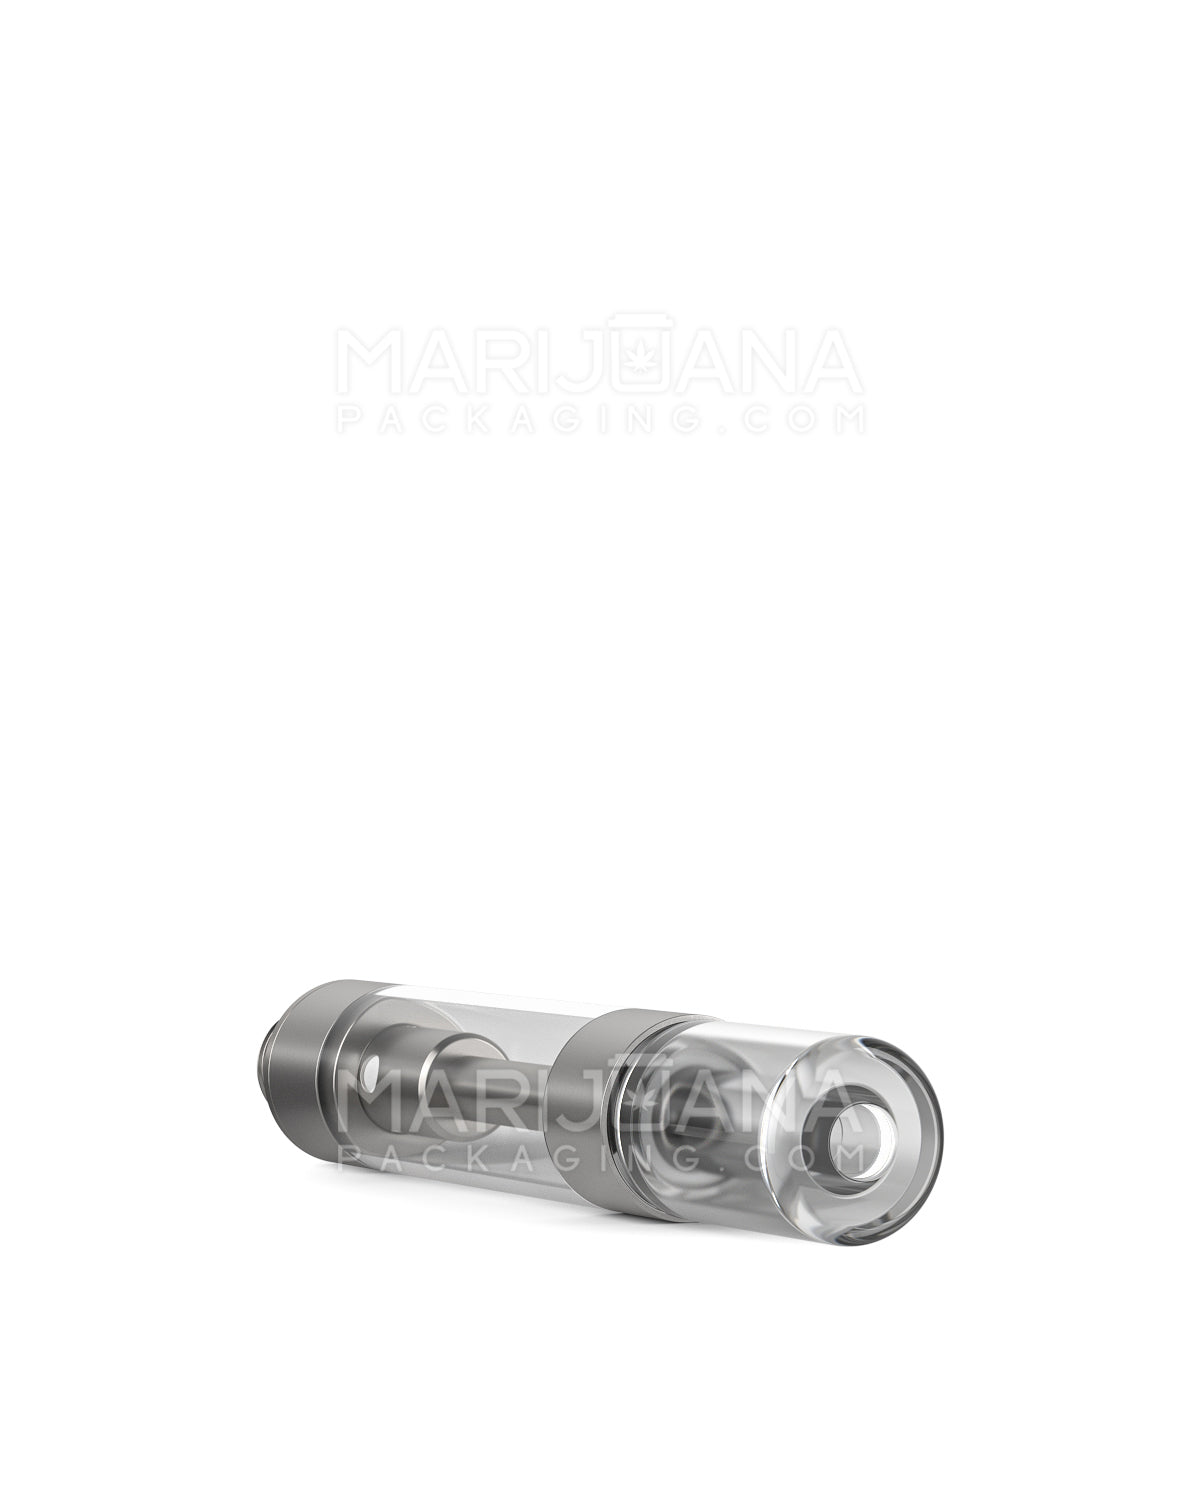 CCELL | Liquid6 Reactor Plastic Vape Cartridge with Barrel Clear Plastic Mouthpiece | 1mL - Press On - 100 Count - 6